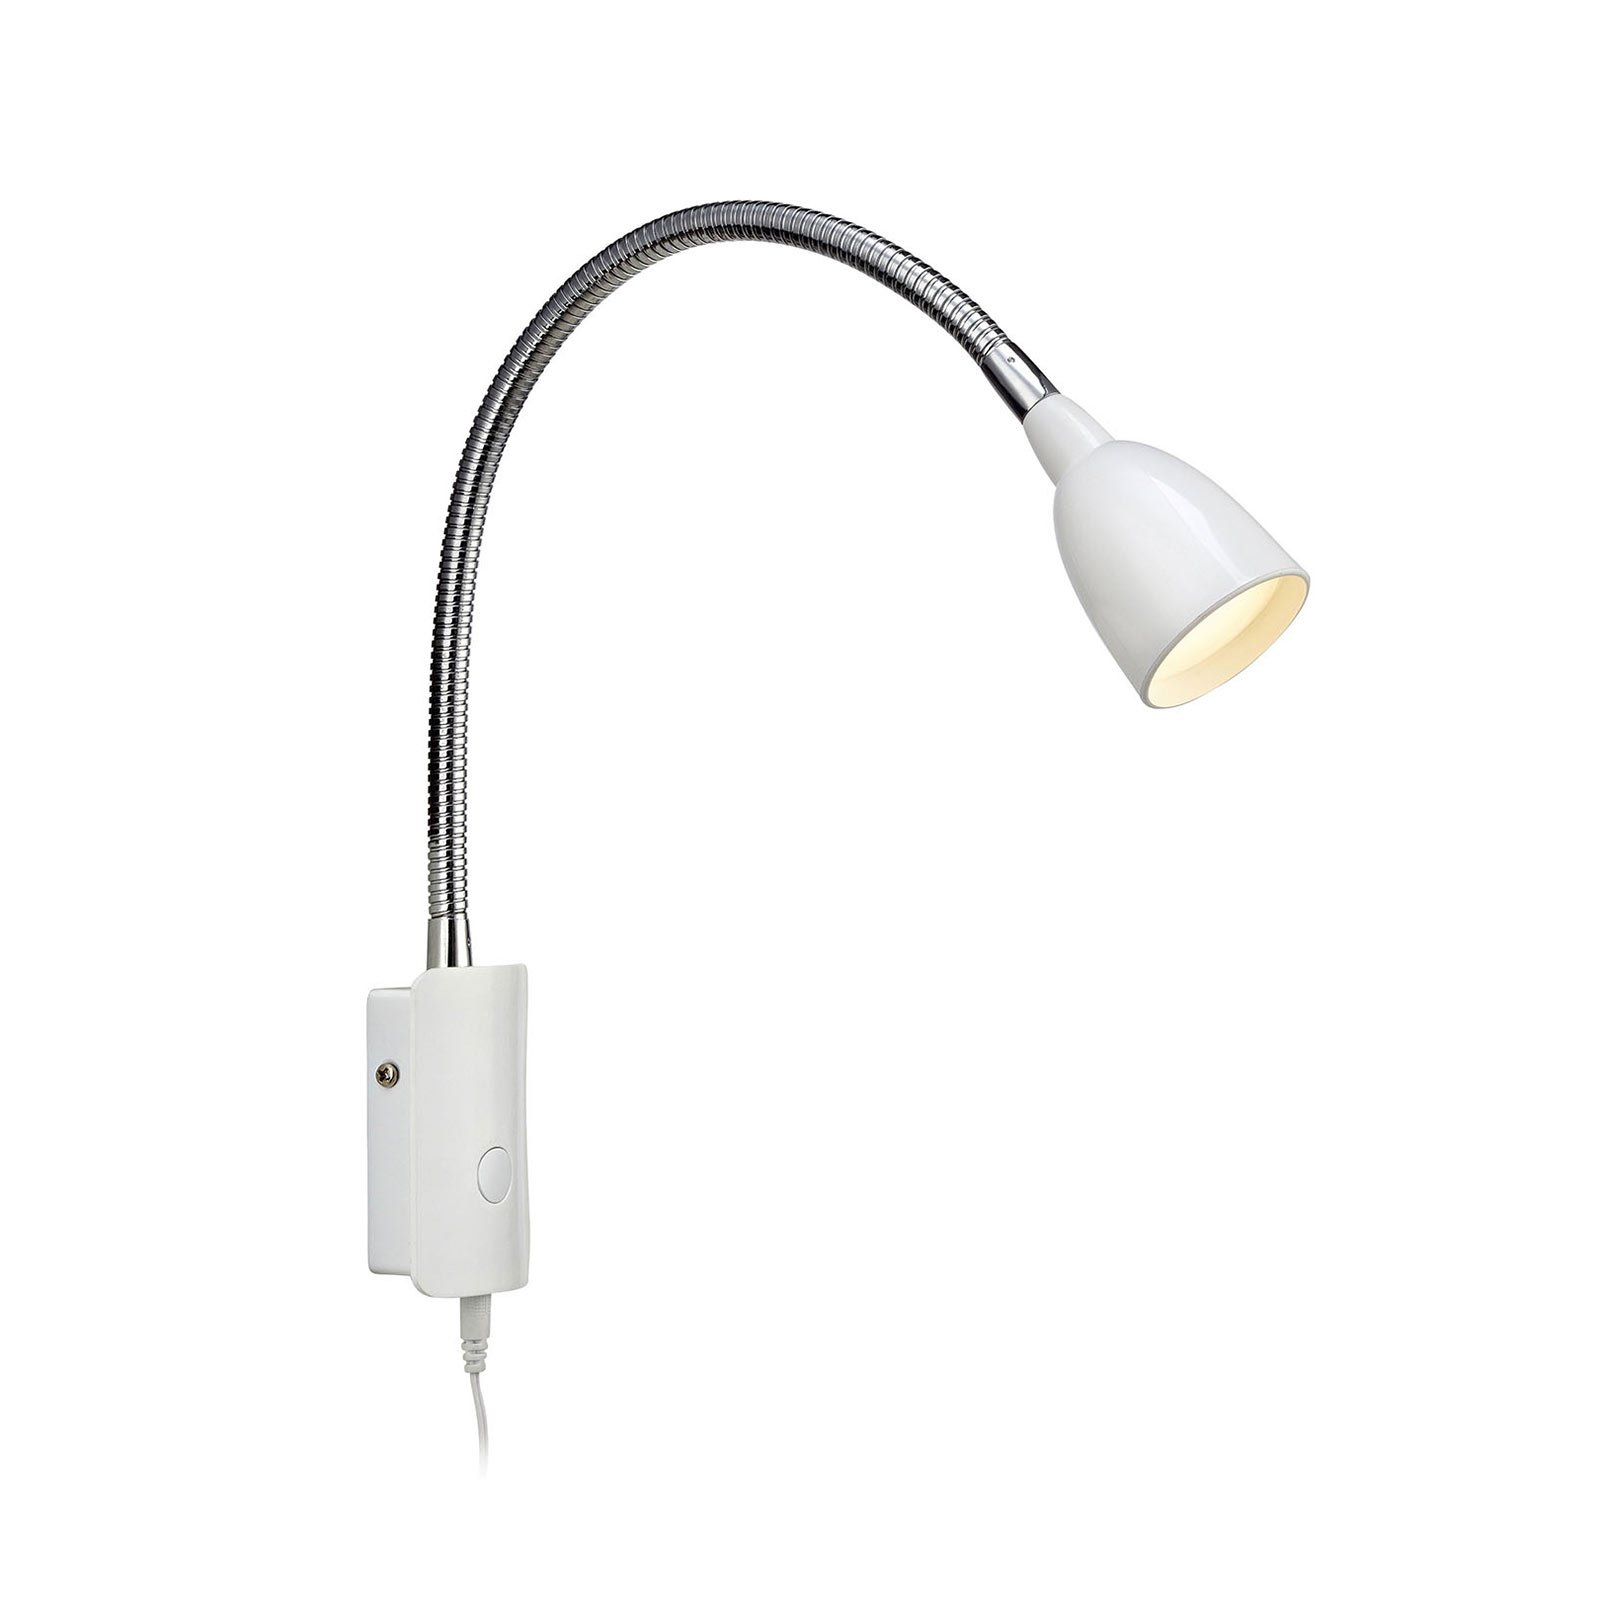 Tulip LED wall lamp with cable and plug, white